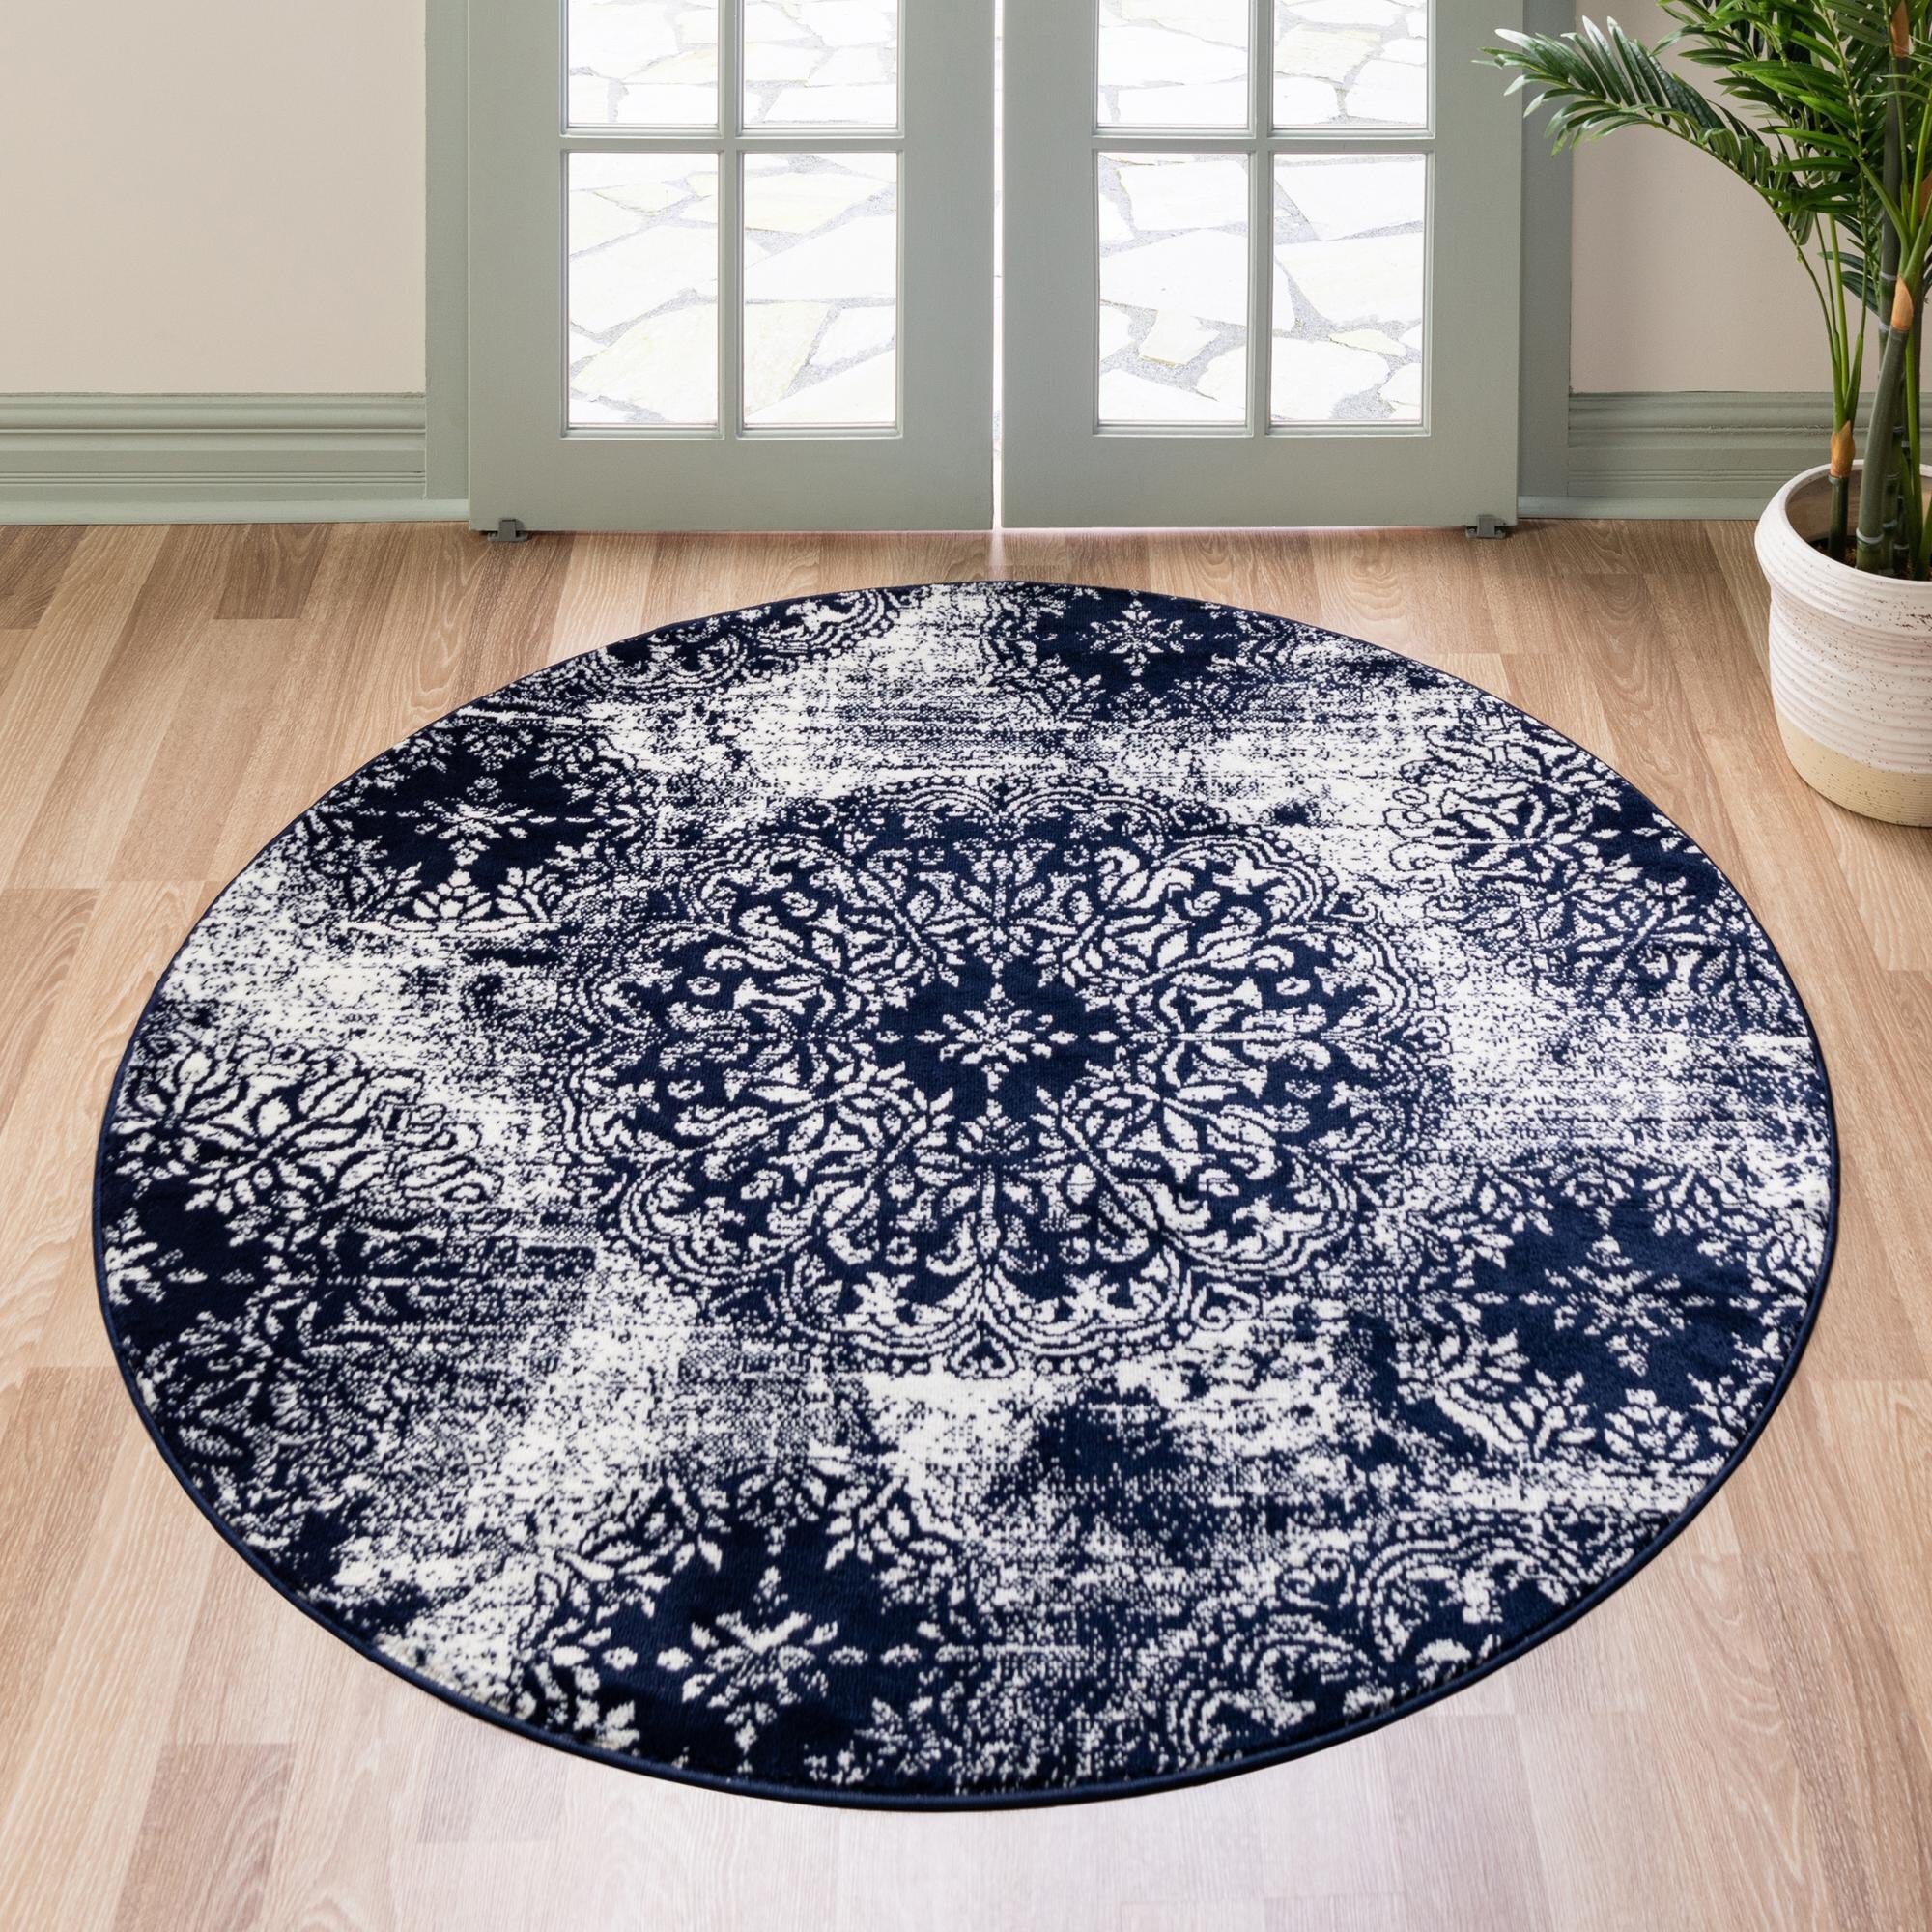 Wayfair | Navy Round Area Rugs You'll Love in 2022